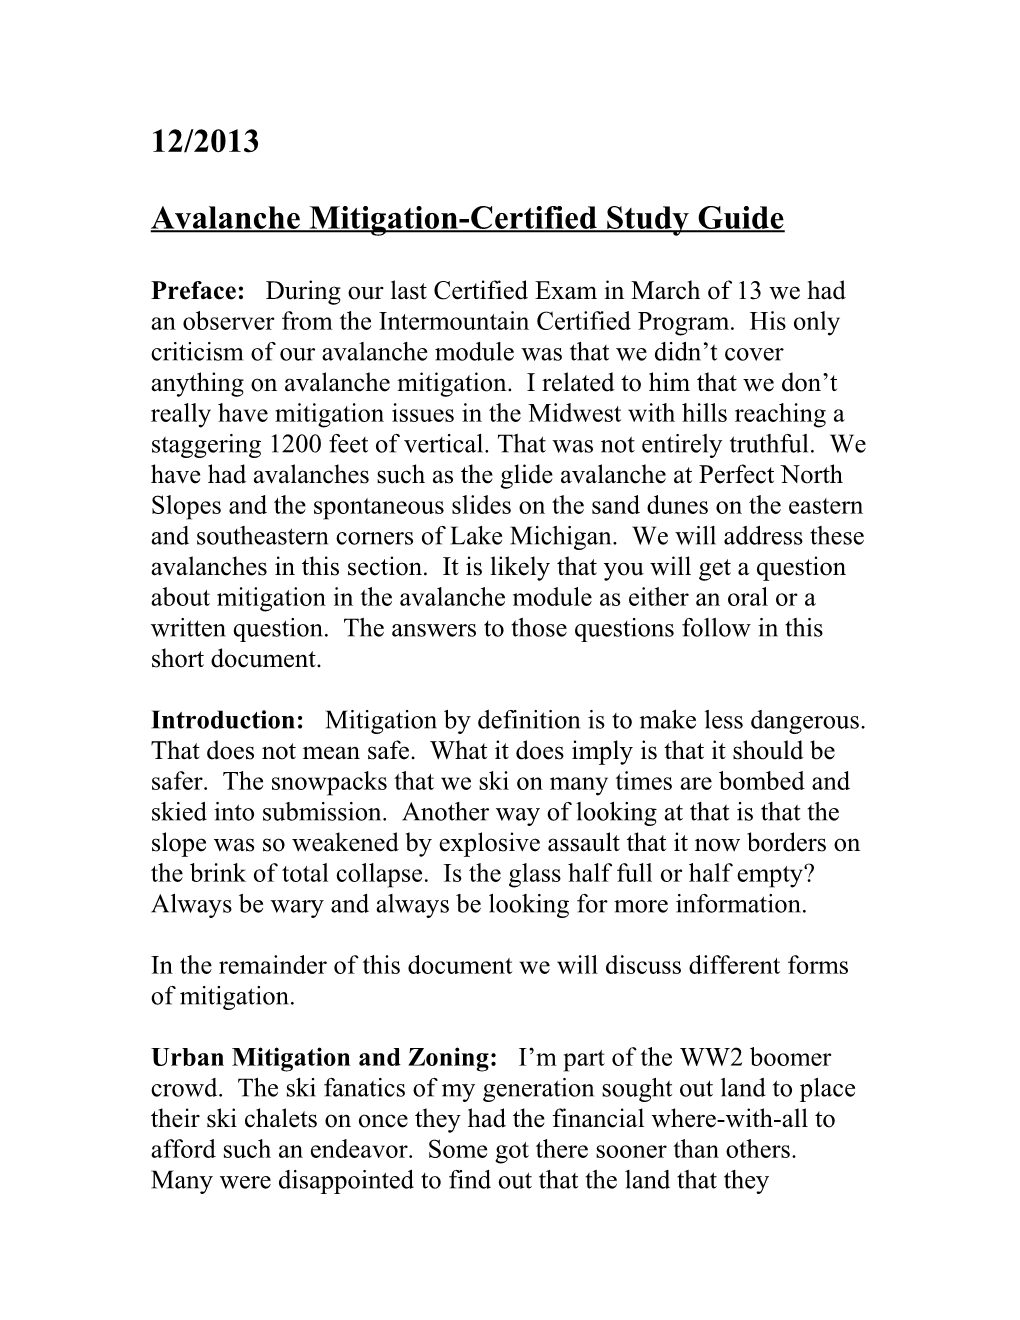 Avalanche Mitigation-Certified Study Guide